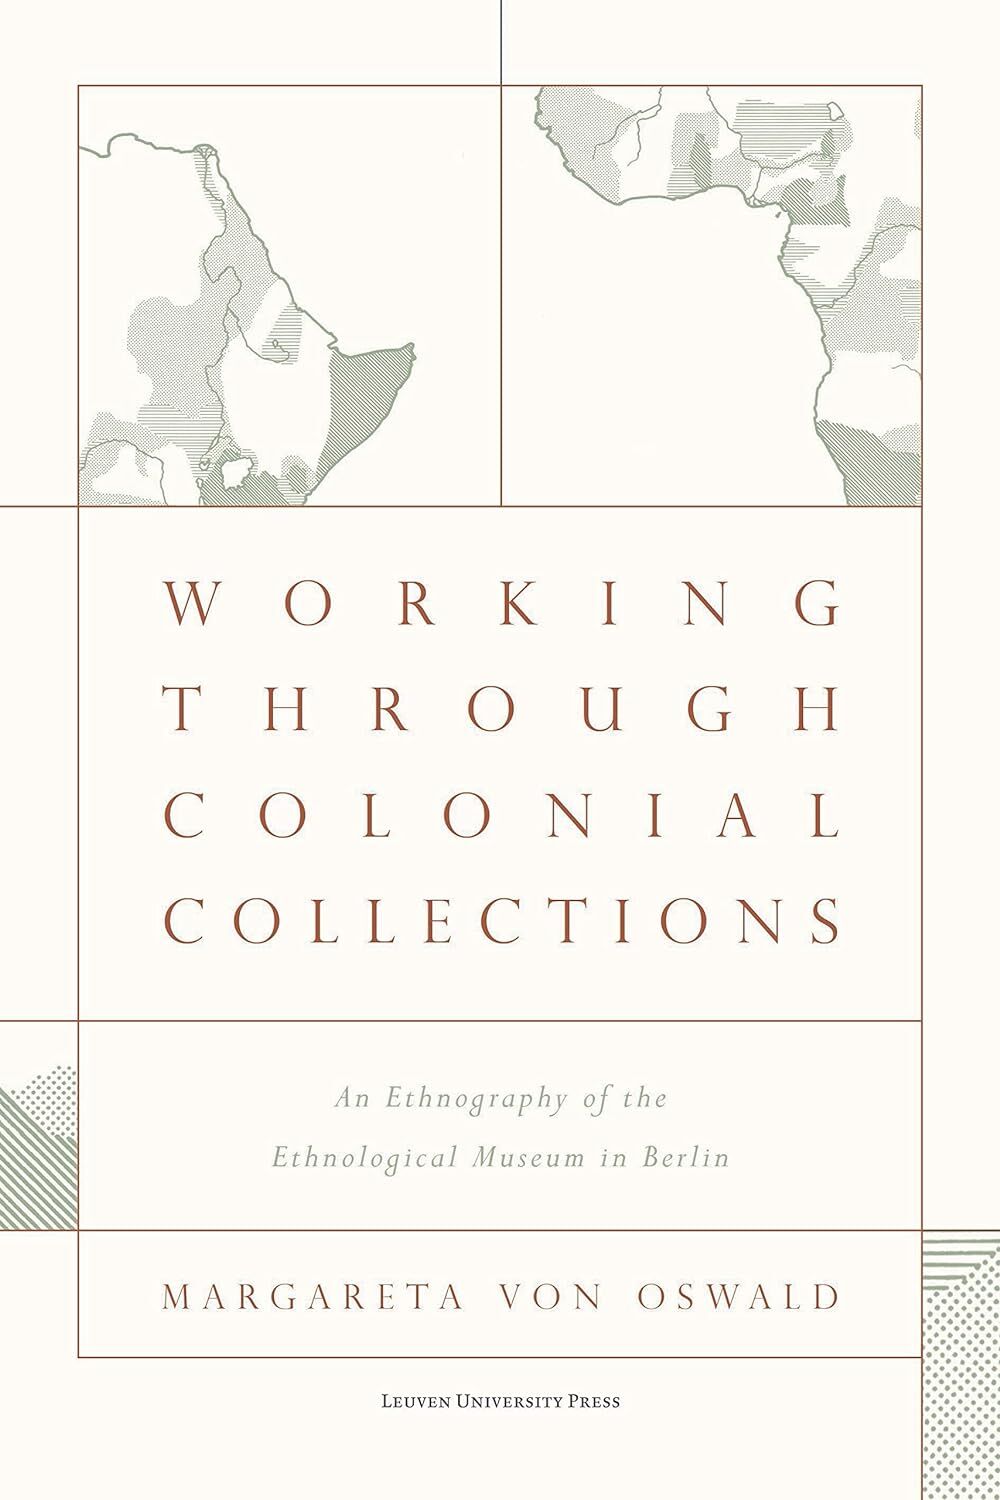 Book review. Von Oswald M (2022) Working Through Colonial Collections: An Ethnography of the Ethnological Museum in Berlin